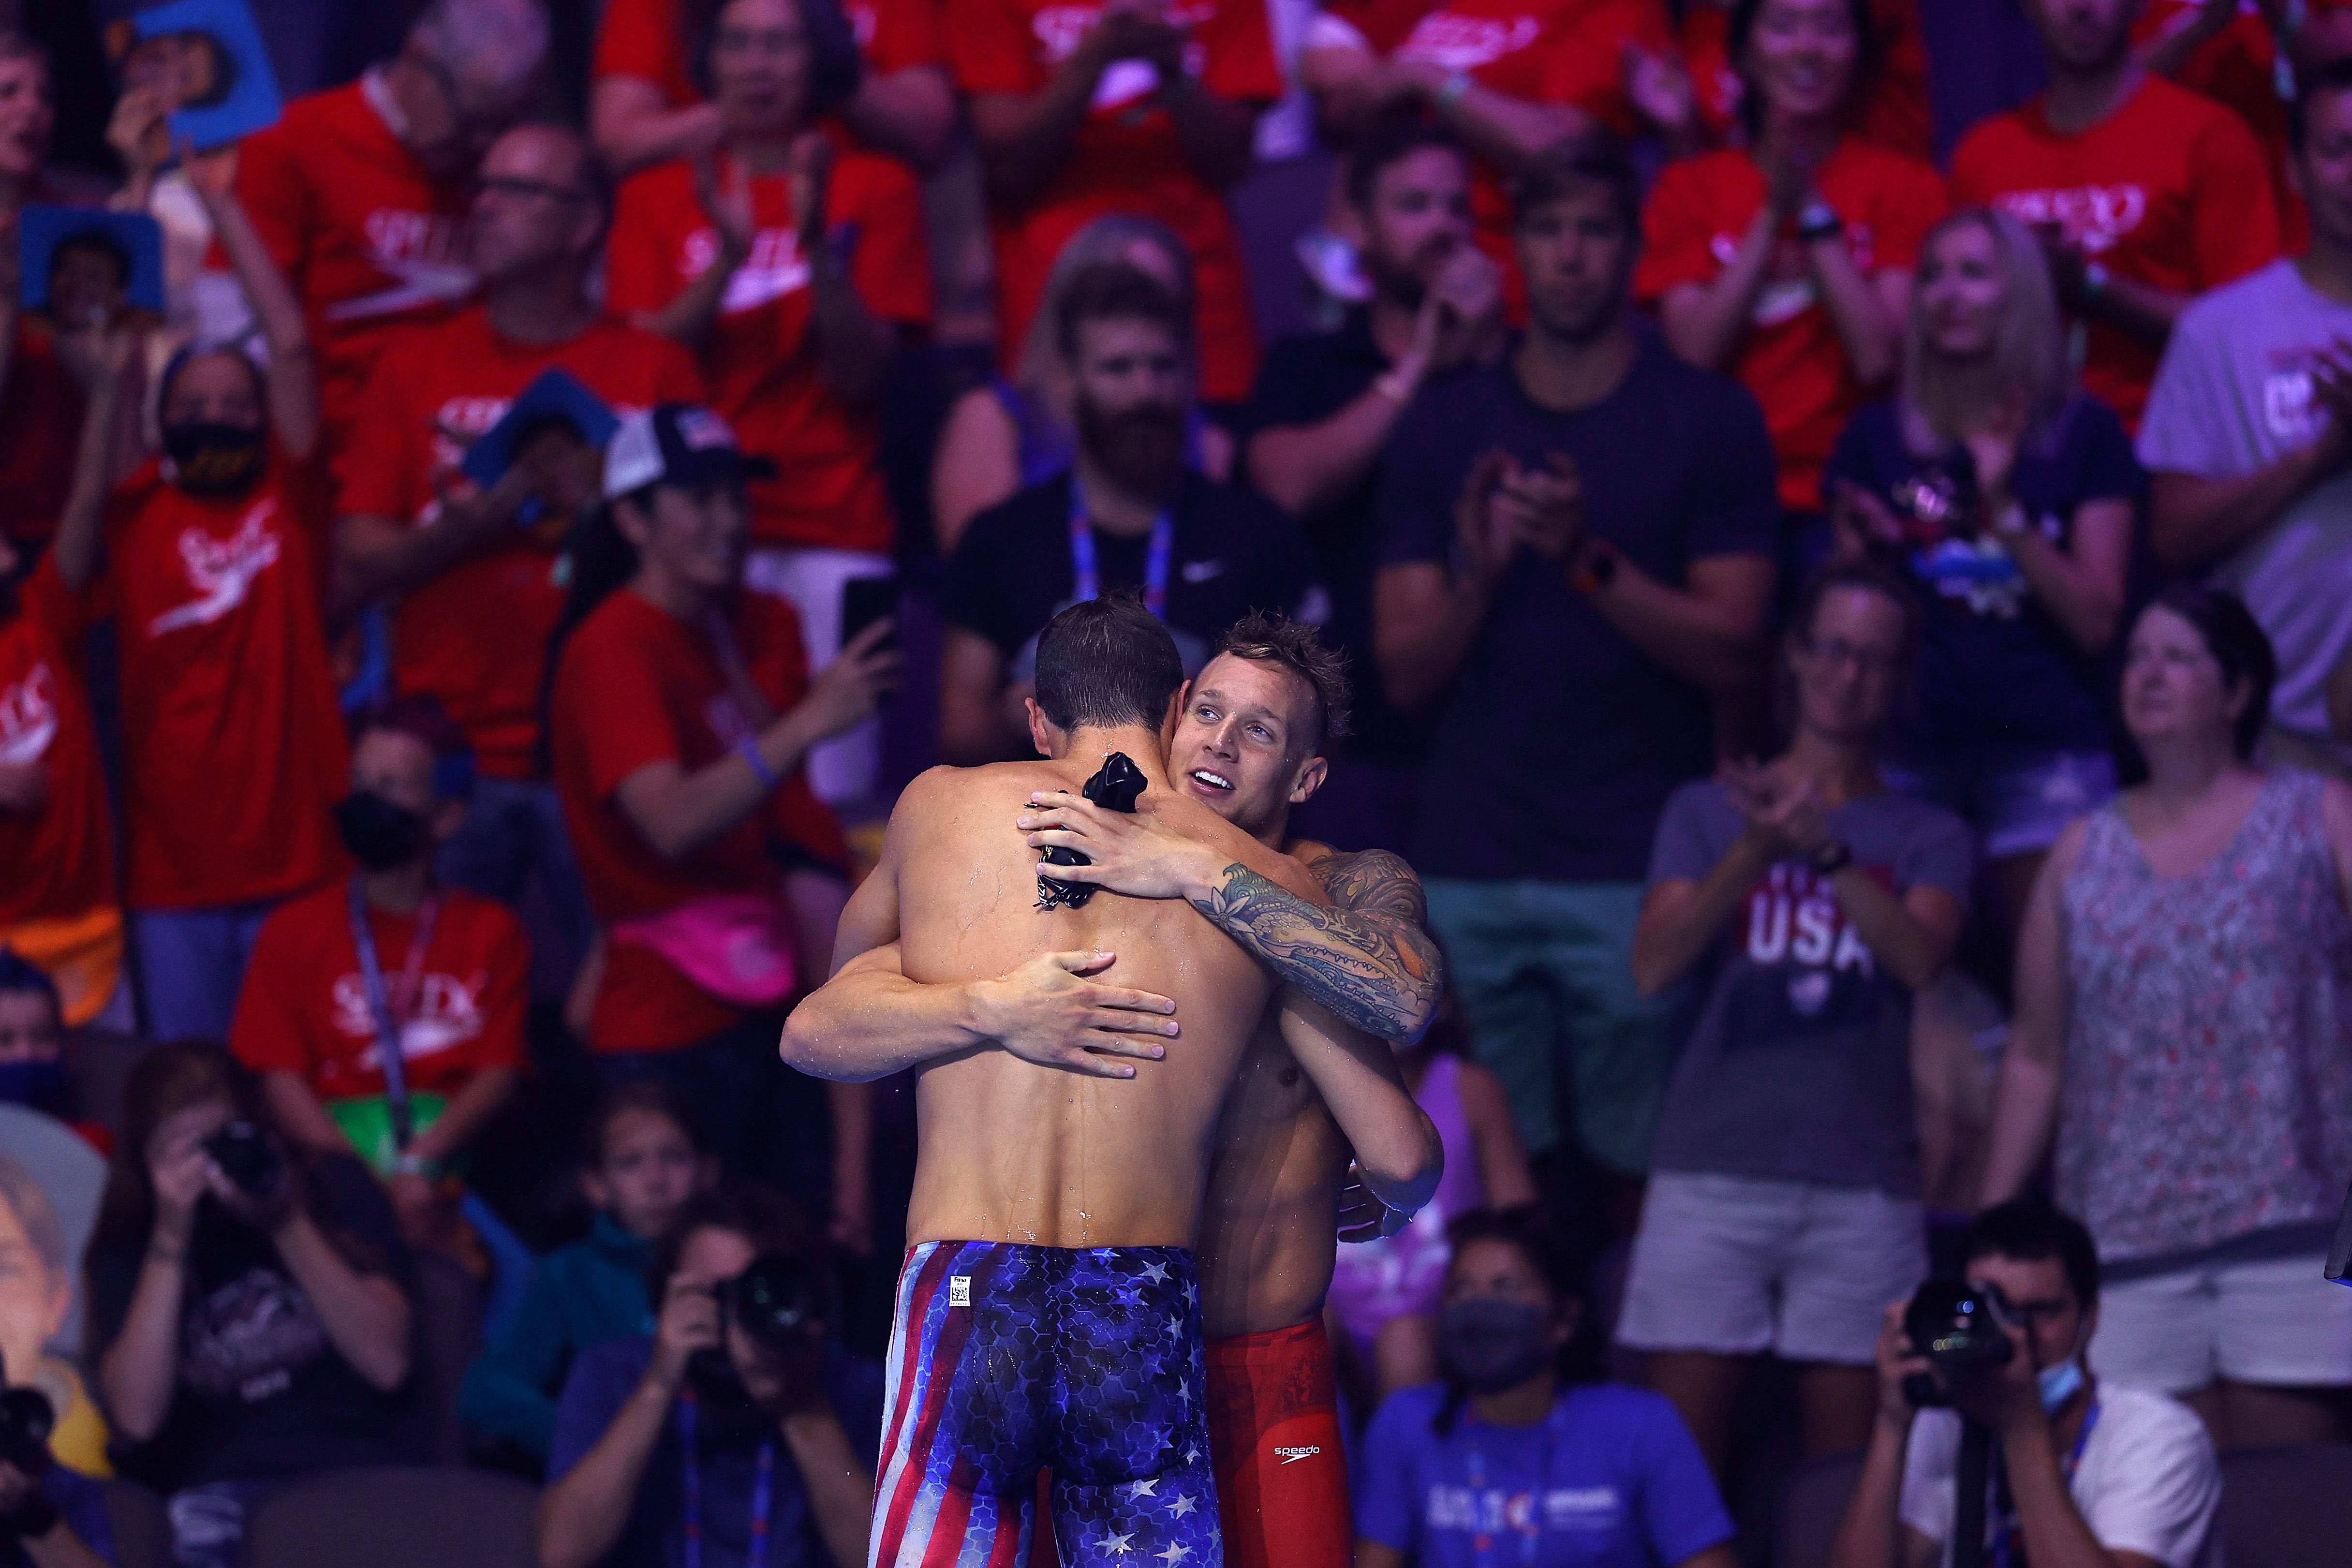 Caeleb Dressel and Michael Andrew of the United States reacts after competing in the Men's 50m freestyle final where Dressel set a new American Record during Day Eight of the 2021 U.S. Olympic Team Swimming Trials at CHI Health Center on June 20, 2021 in Omaha, Nebraska.